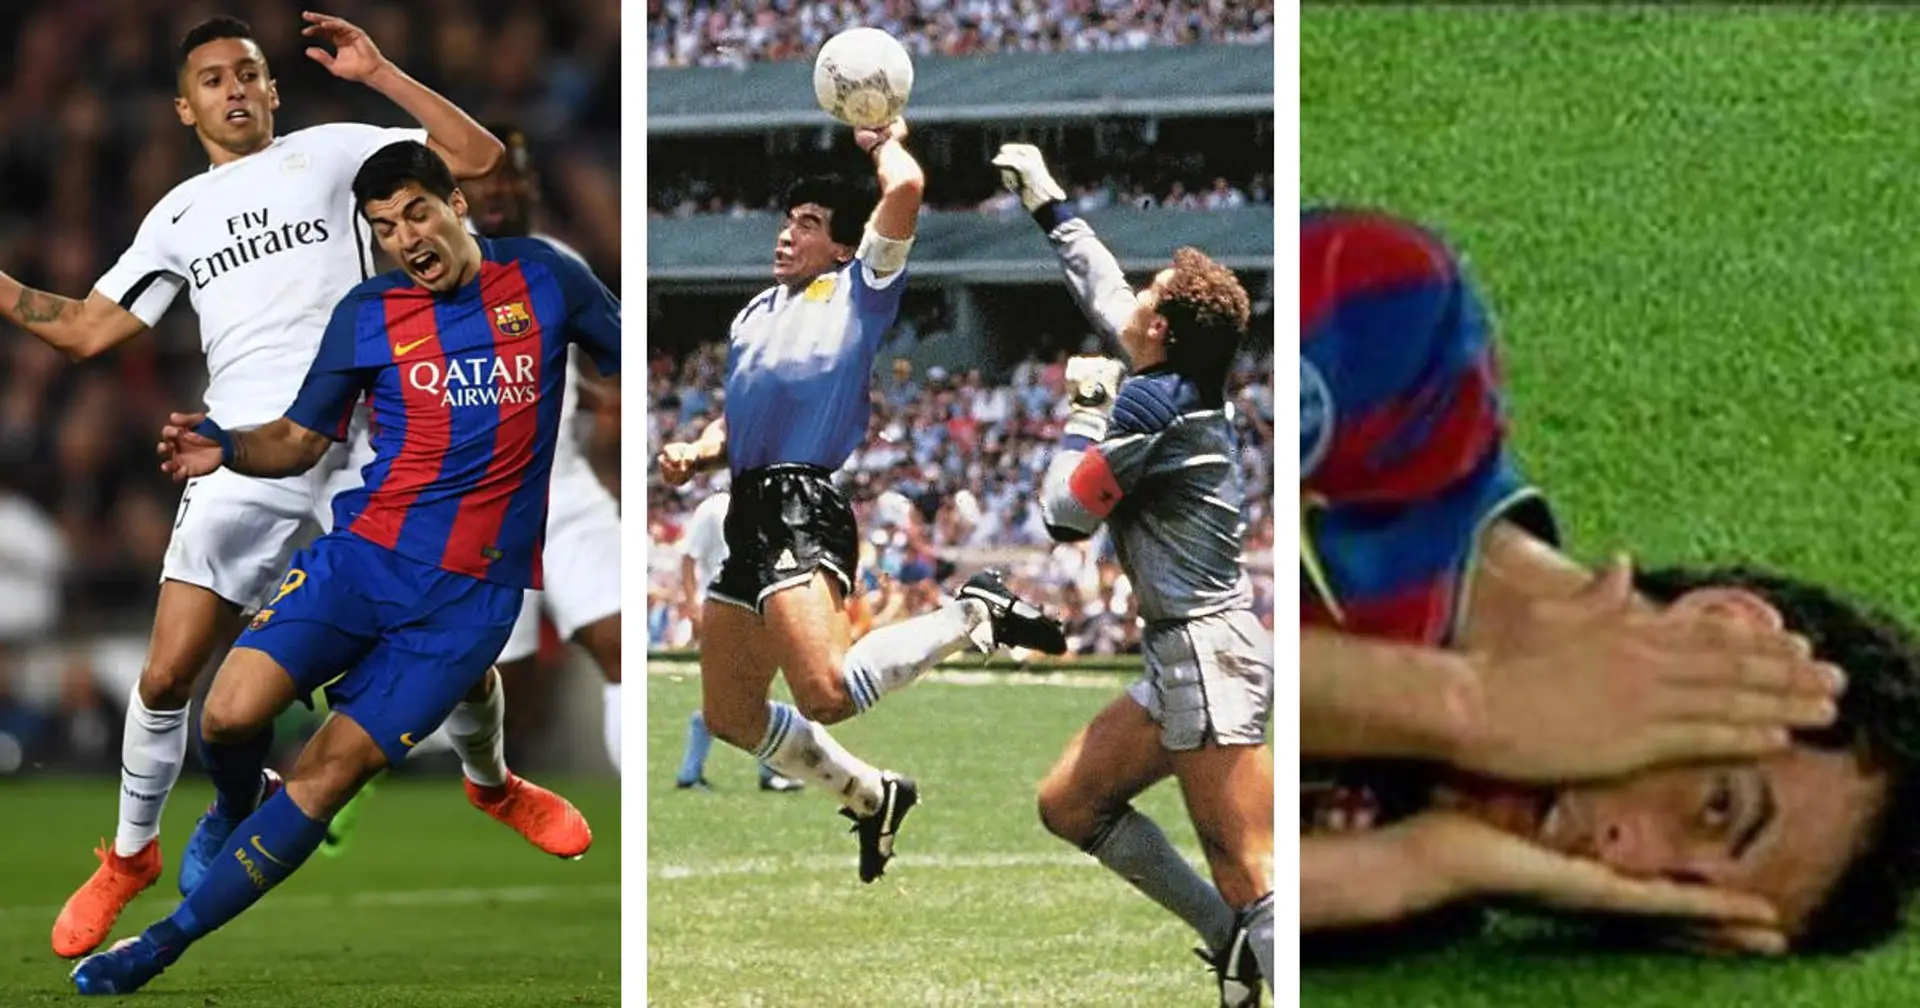 The hand of God, 100% goals not awarded and 9 more worst acts of cheating in football